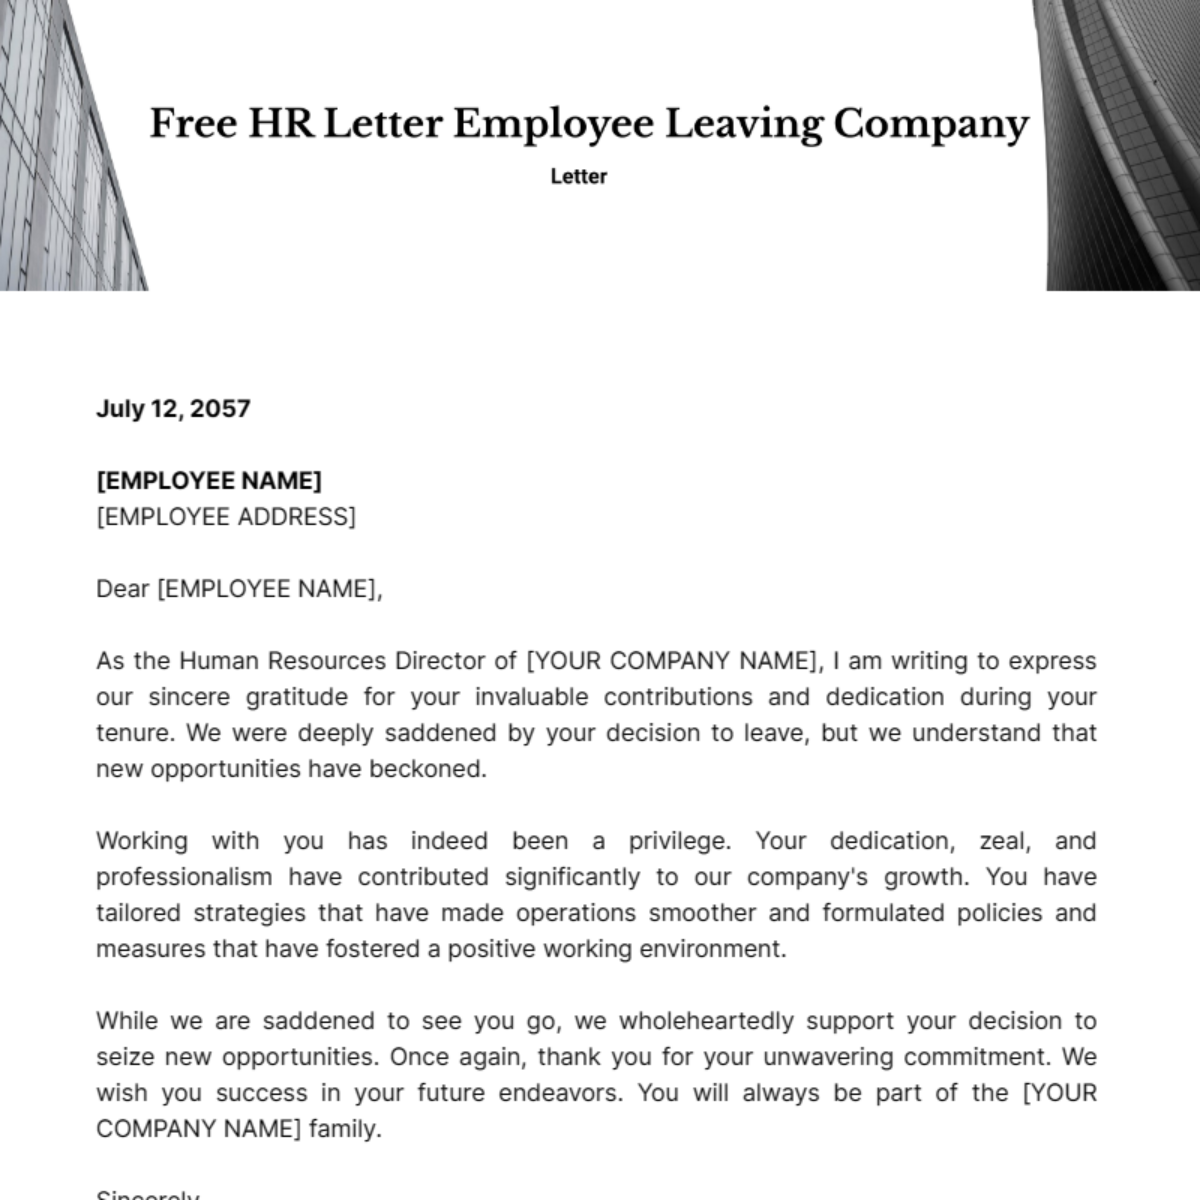 HR Letter Employee Leaving Company Template